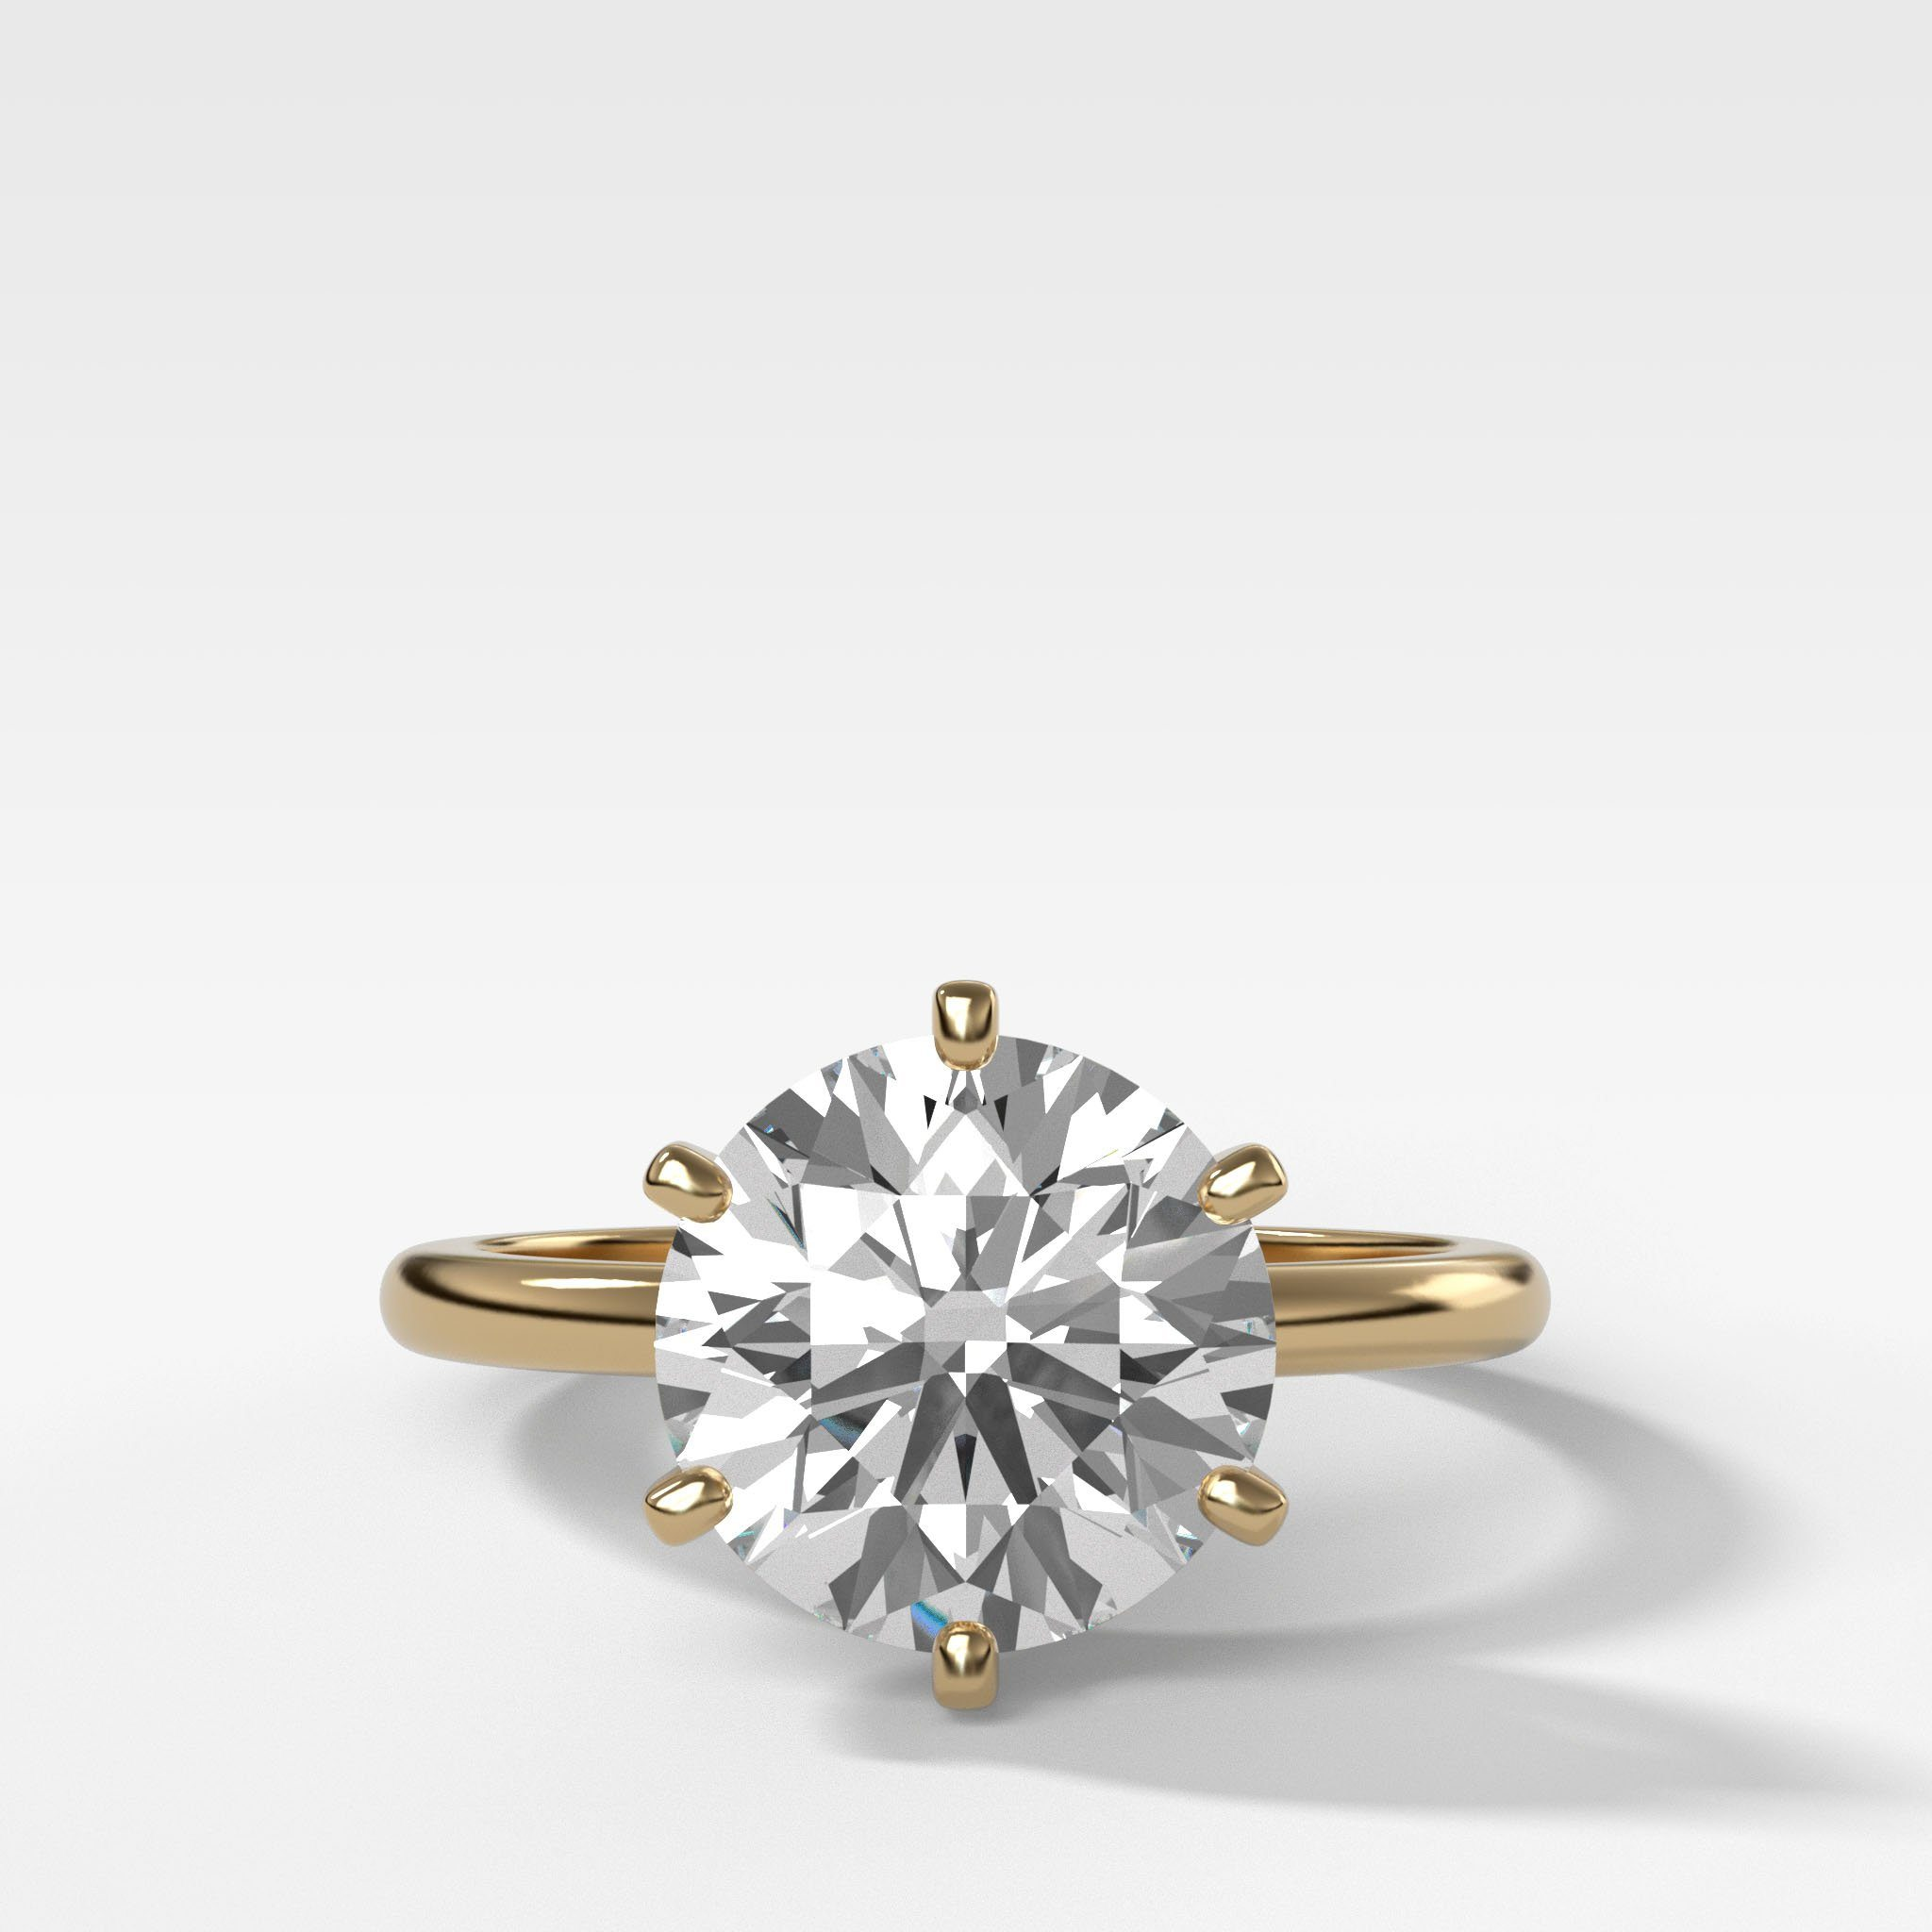 GOODSTONE Nova Solitaire Engagement Ring With Round Cut Diamond